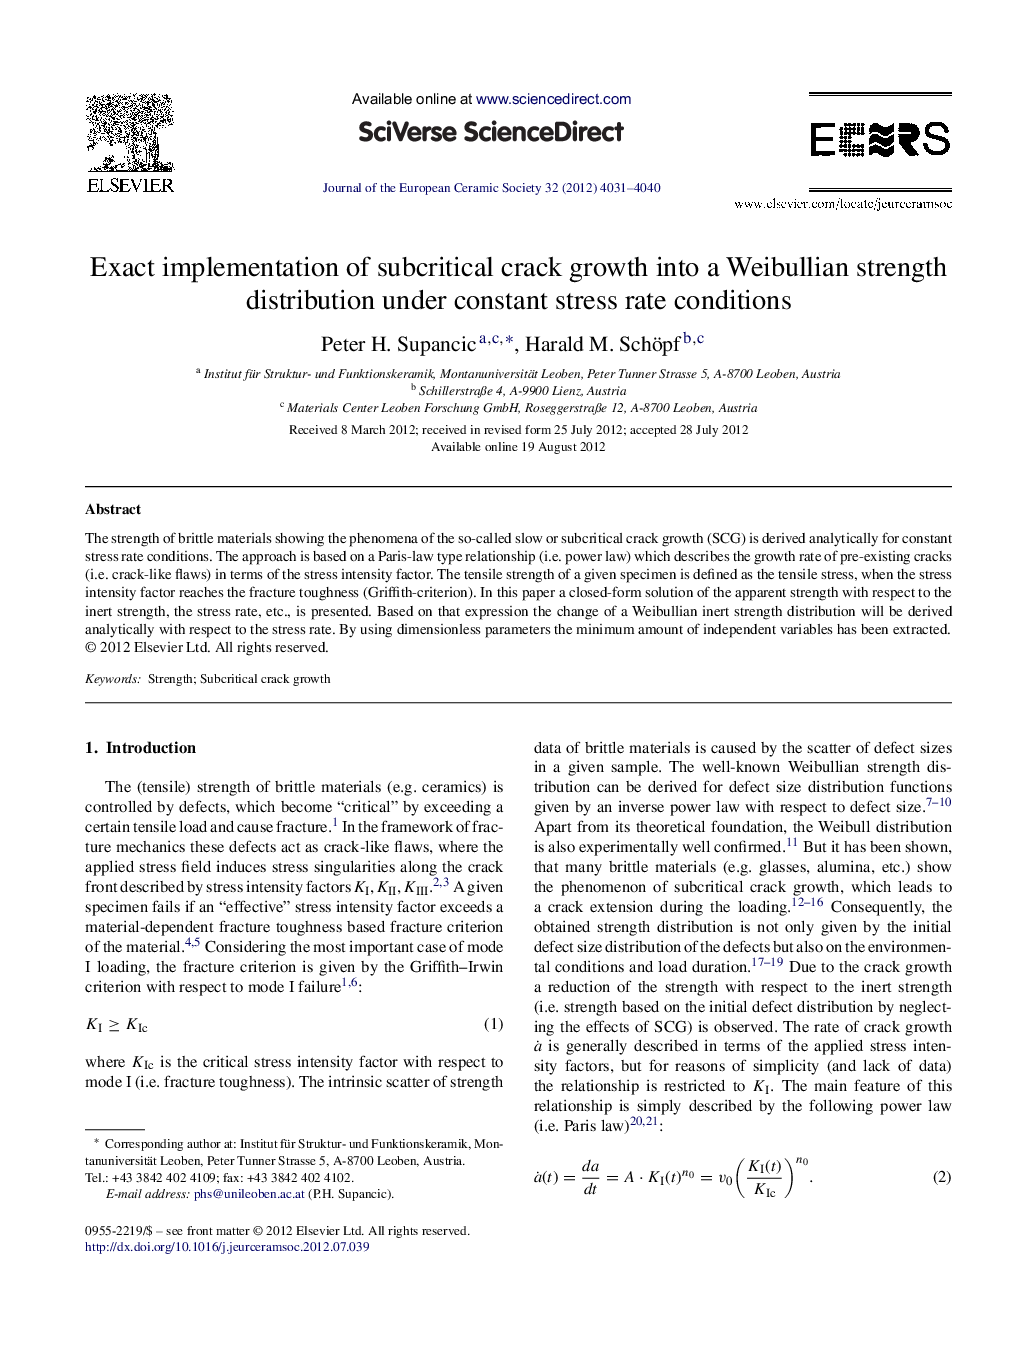 Exact implementation of subcritical crack growth into a Weibullian strength distribution under constant stress rate conditions